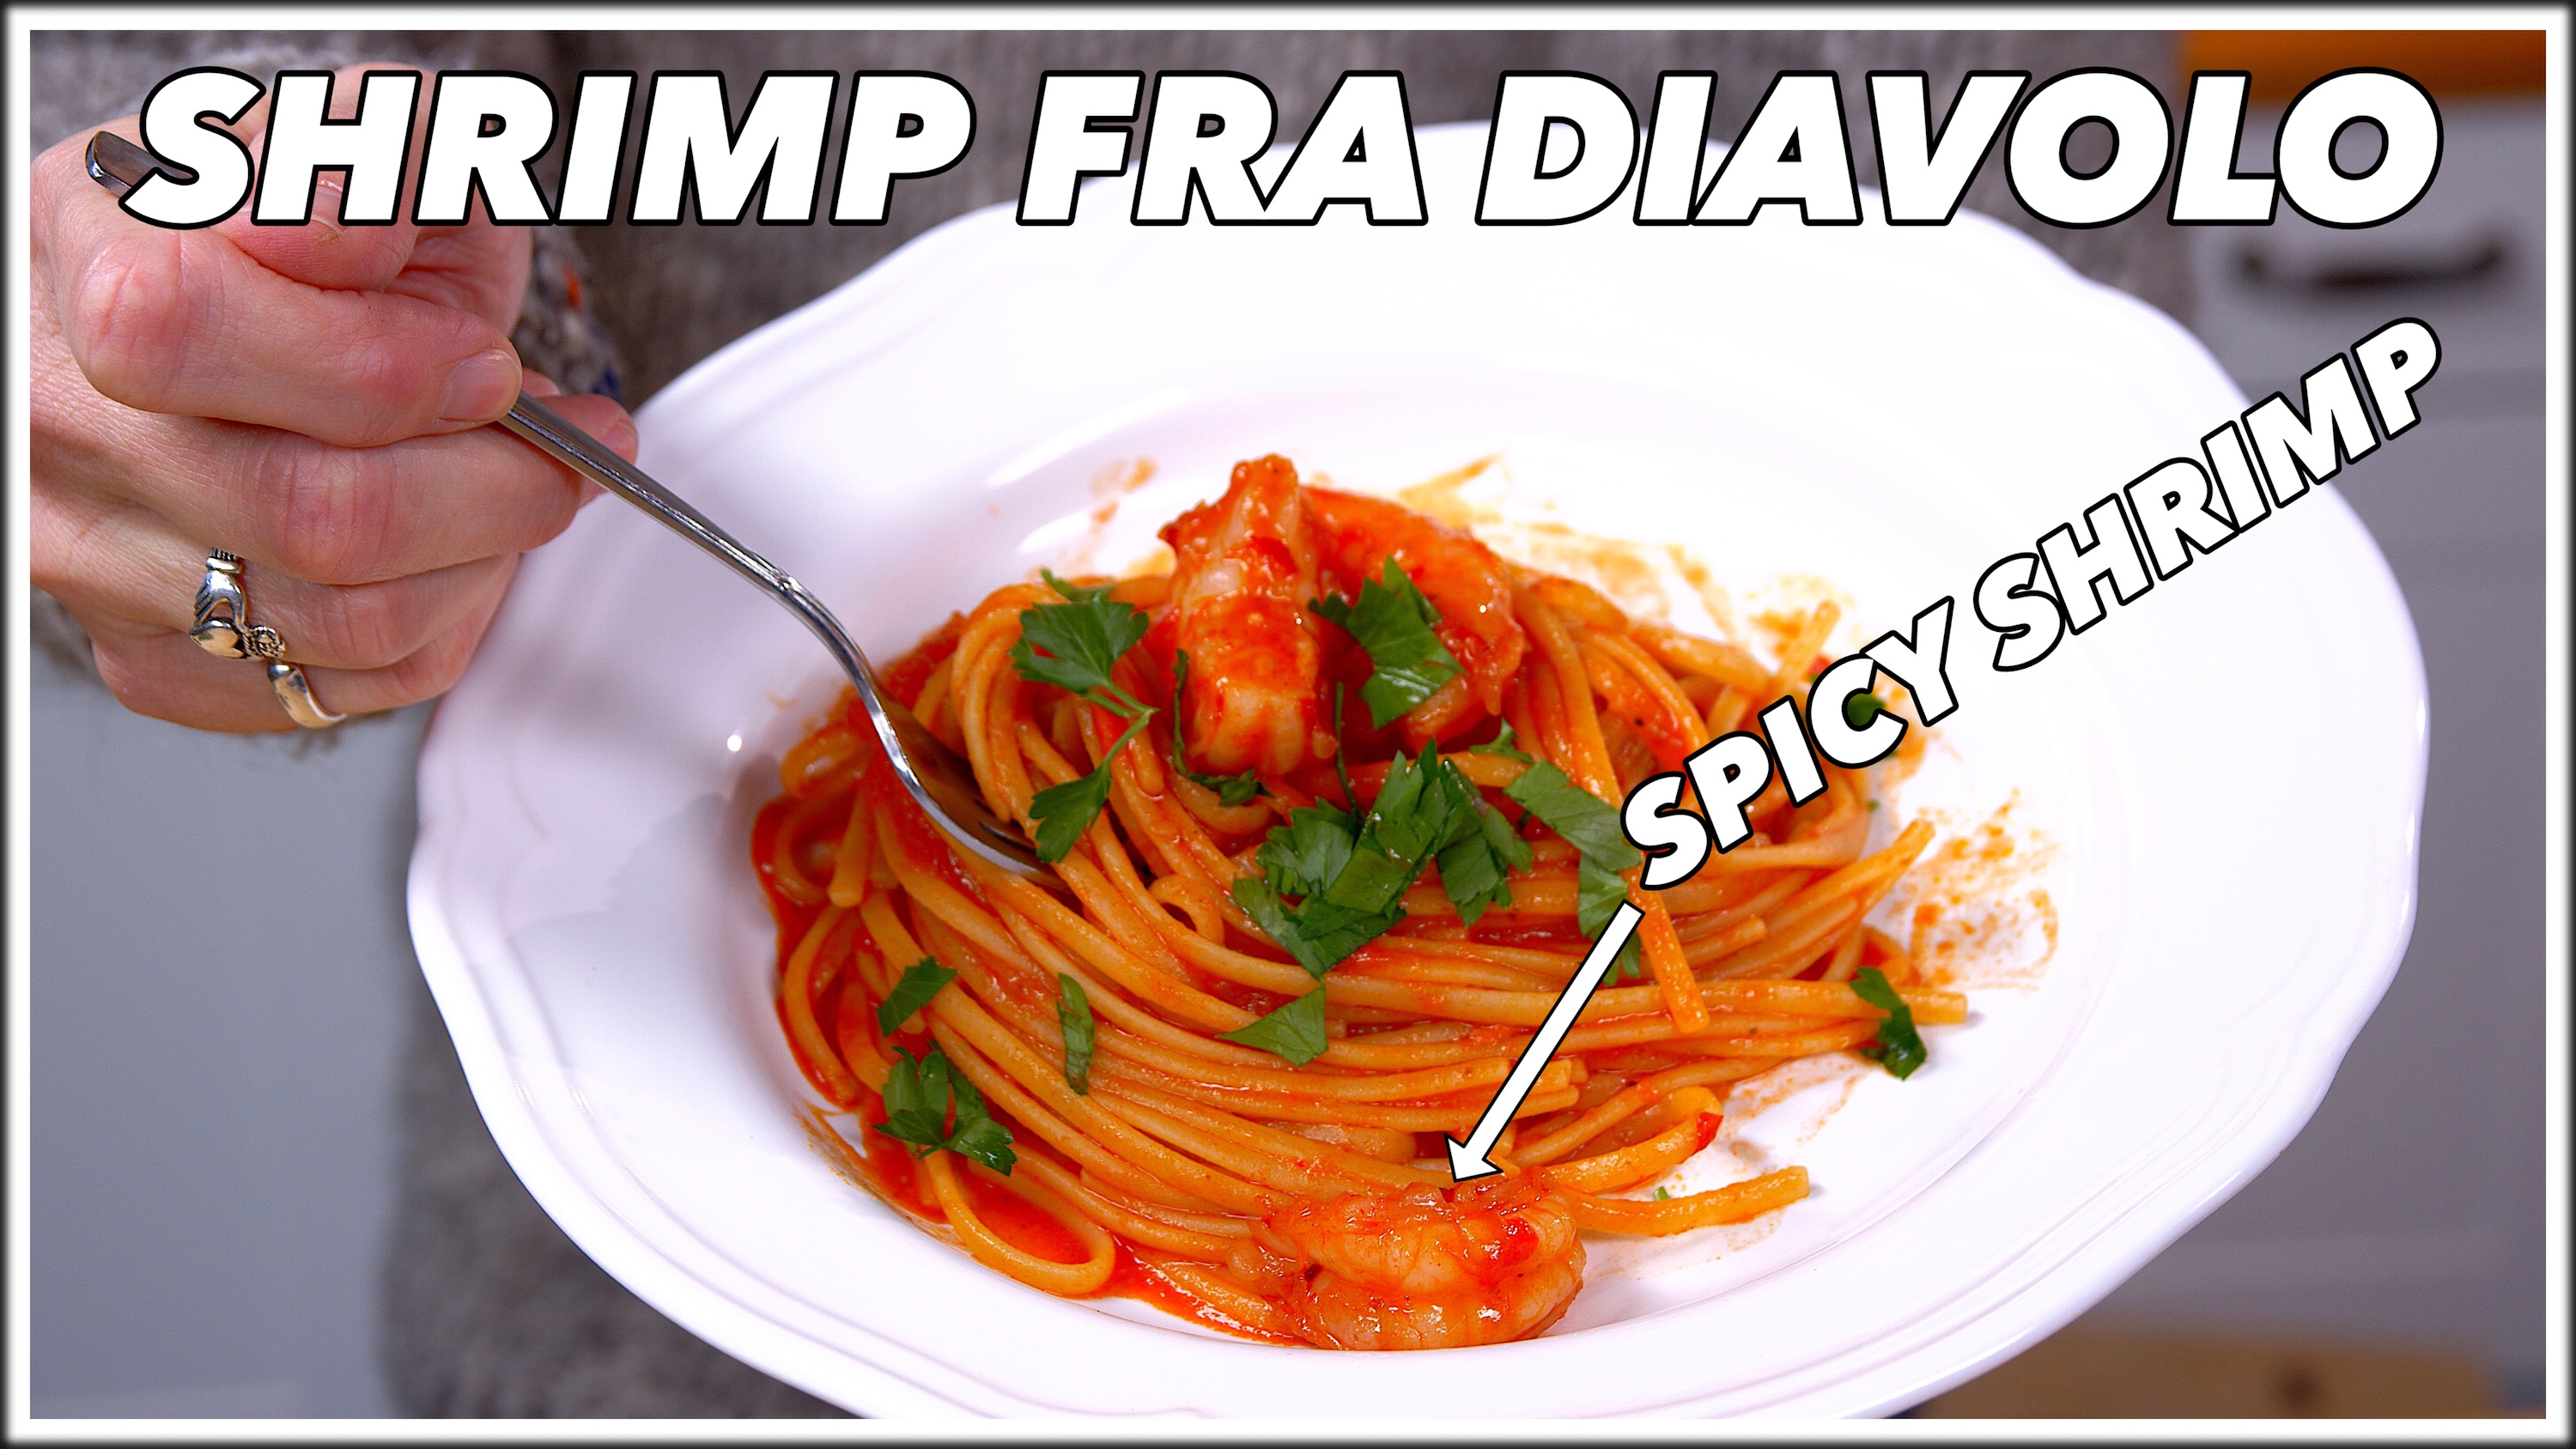 Super easy weeknight meal - Spicy Shrimp Fra Diavolo. 